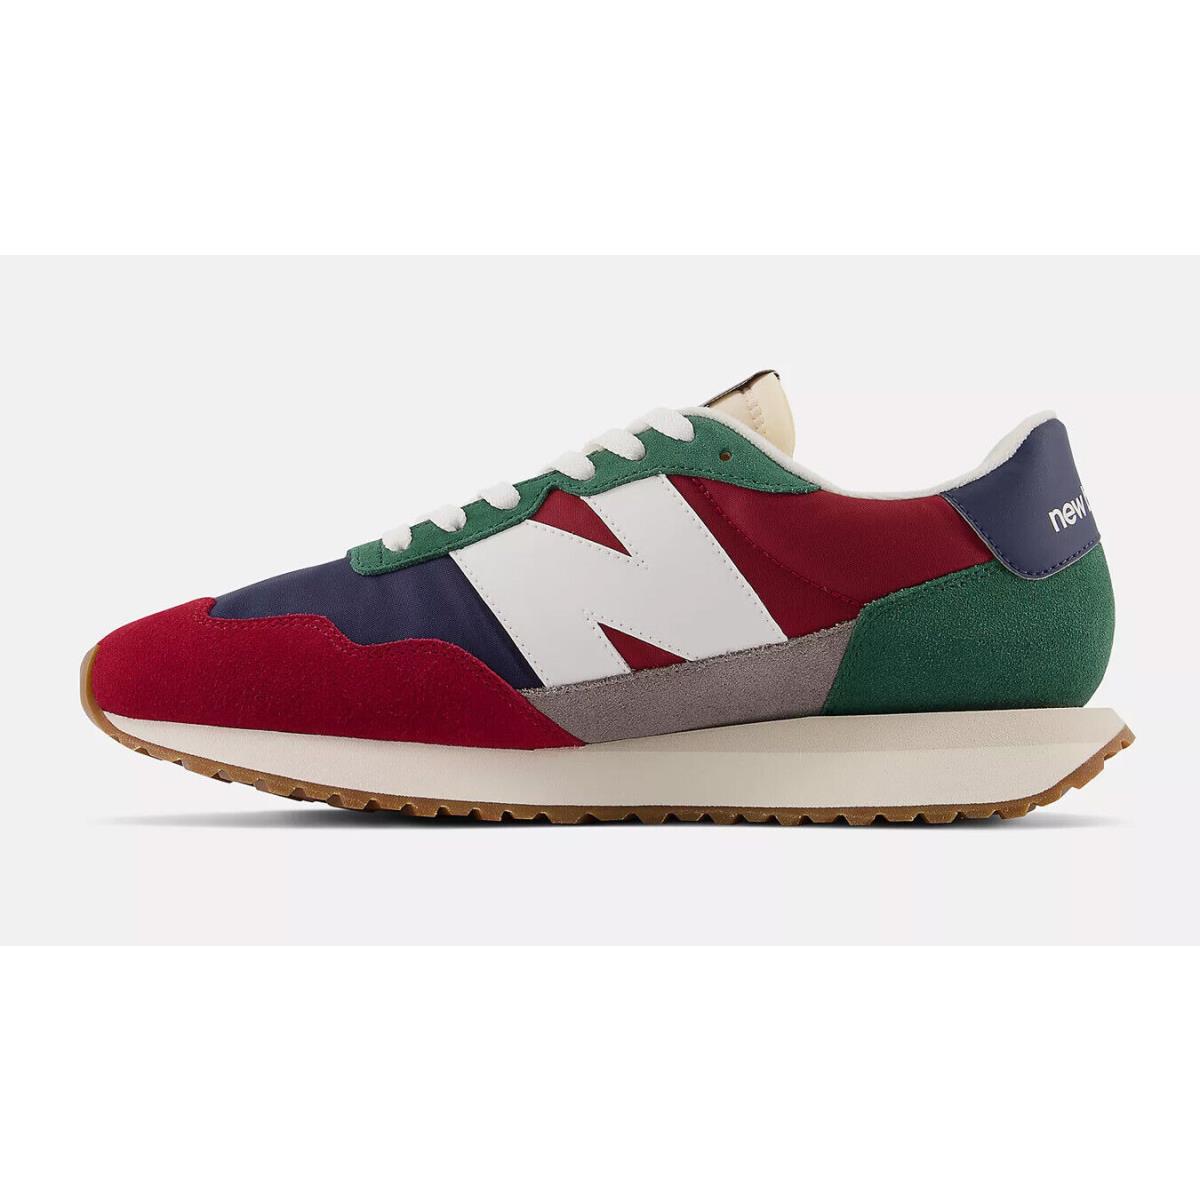 New Balance shoes  - Red/Green/Navy Blue 13